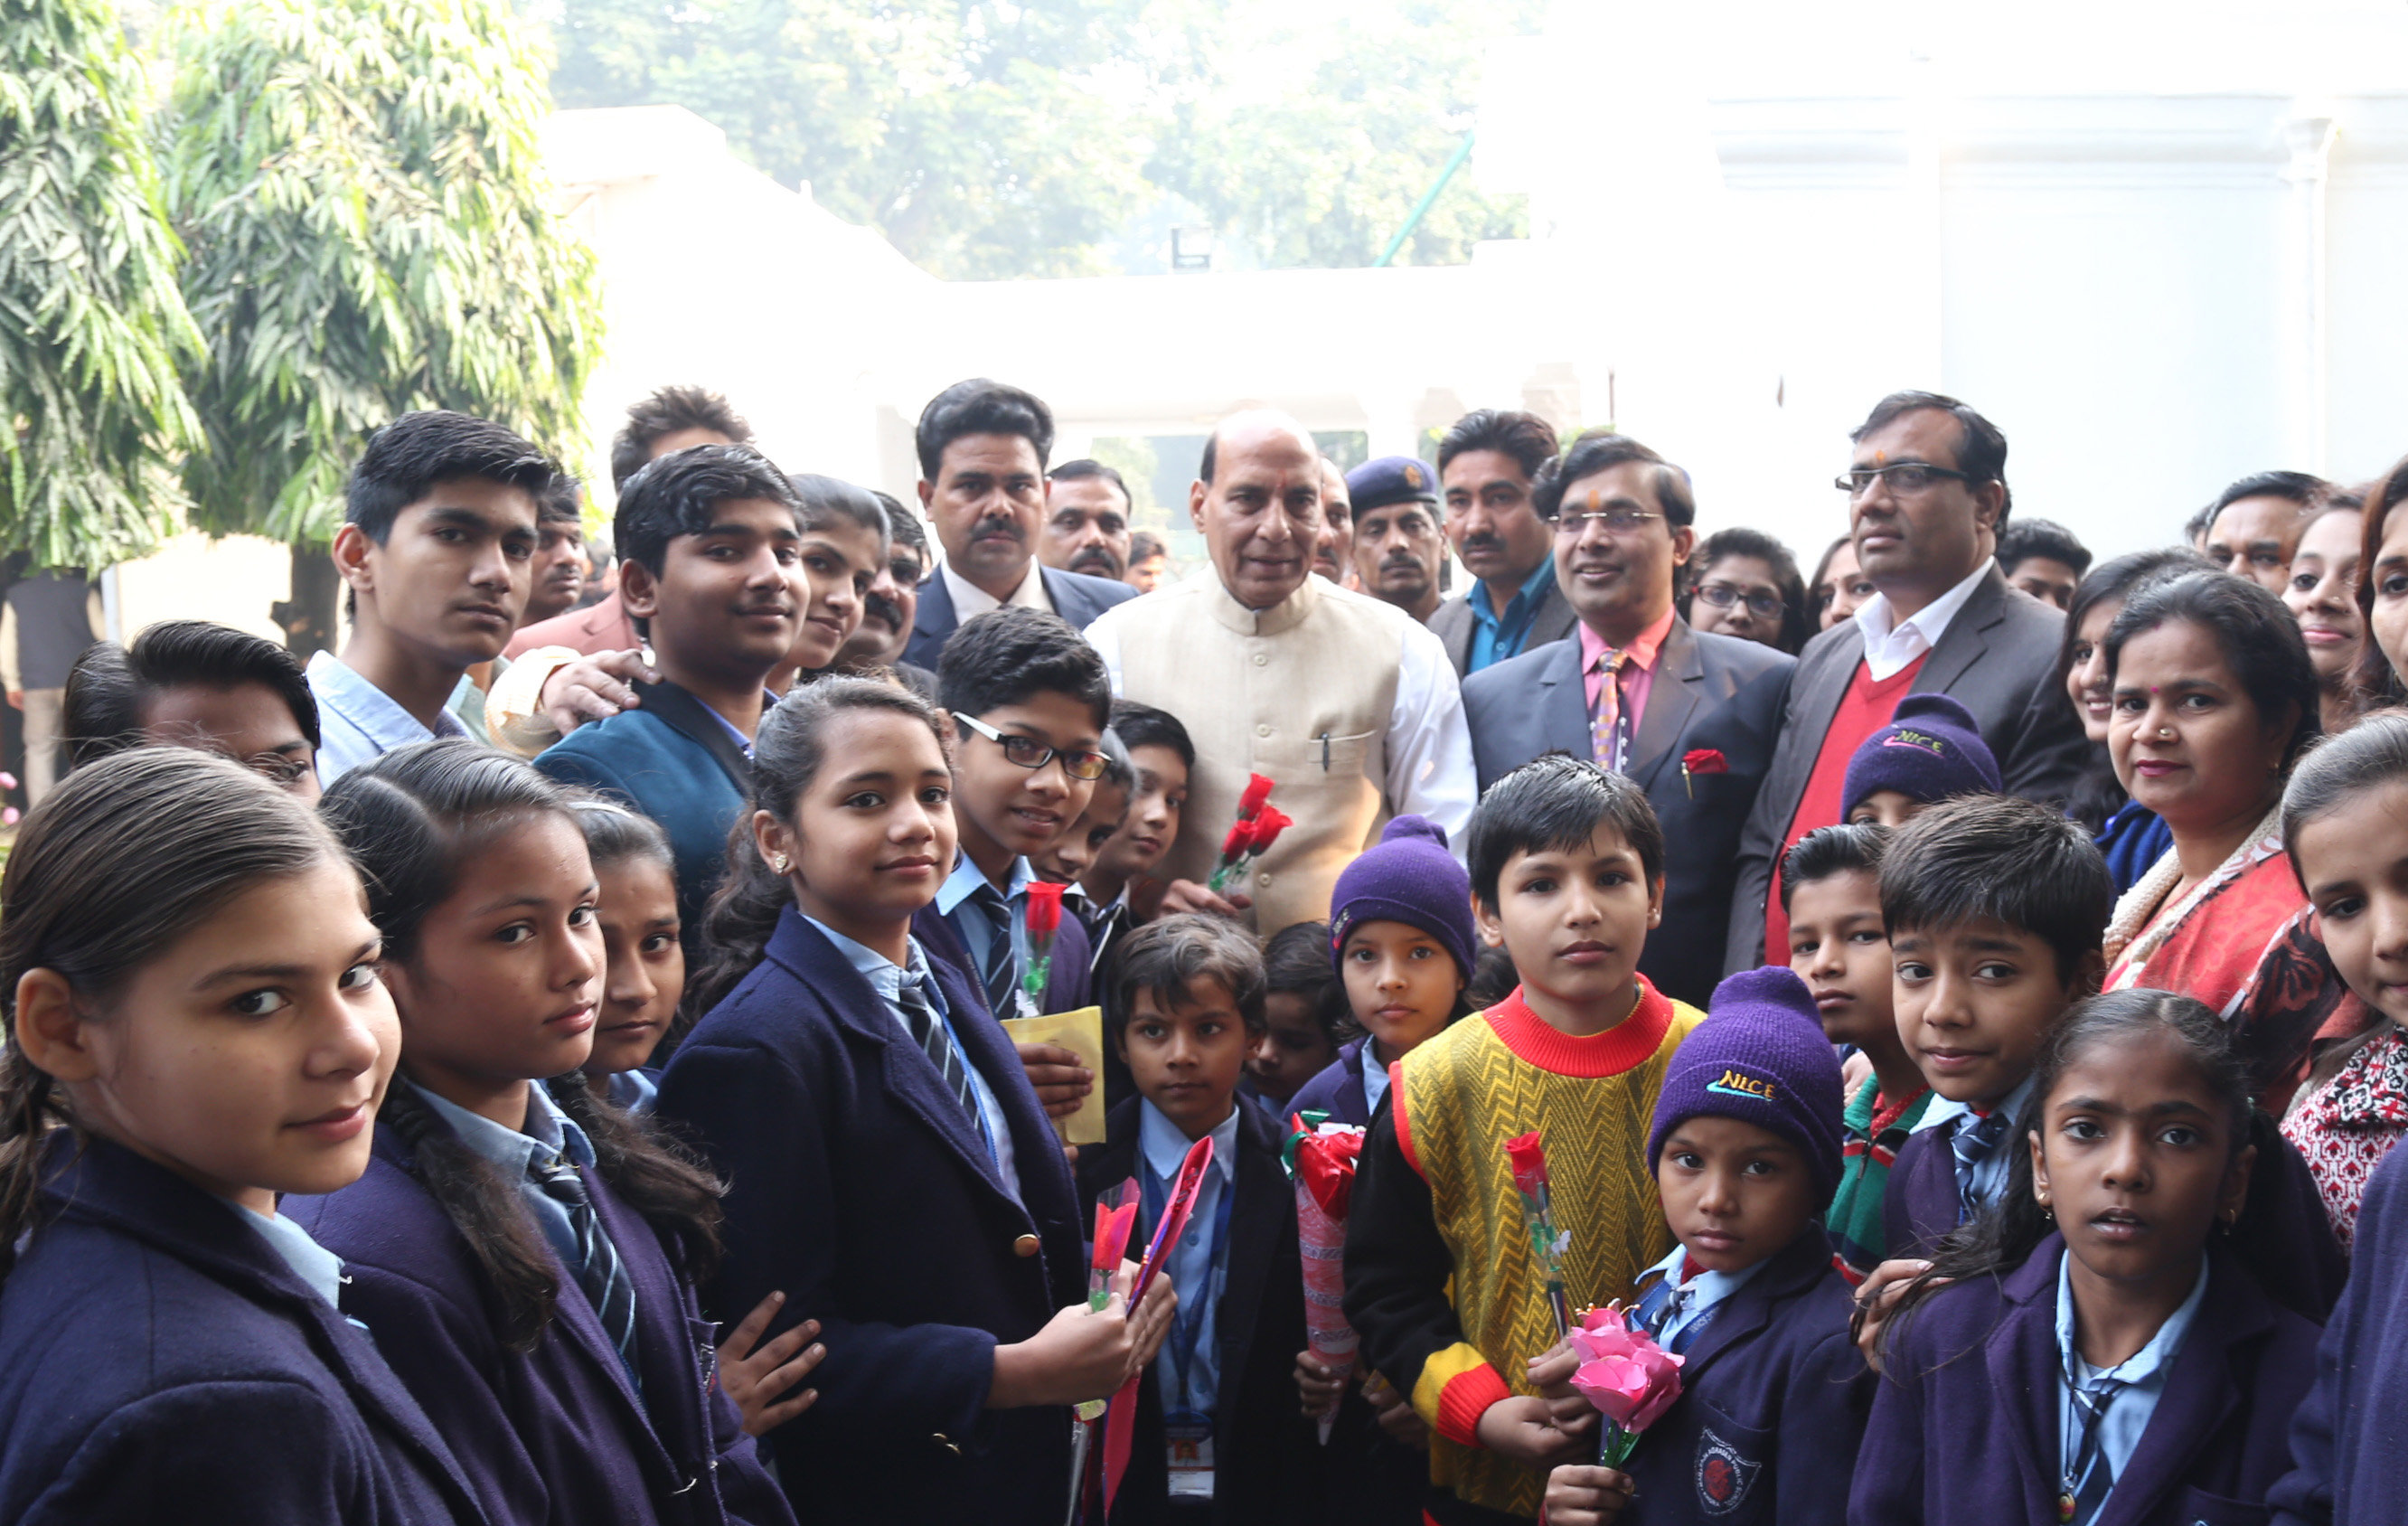 The Union Home Minister, Shri Rajnath Singh celebrating the New Year with a group of school children, in New Delhi on January 01, 2017.